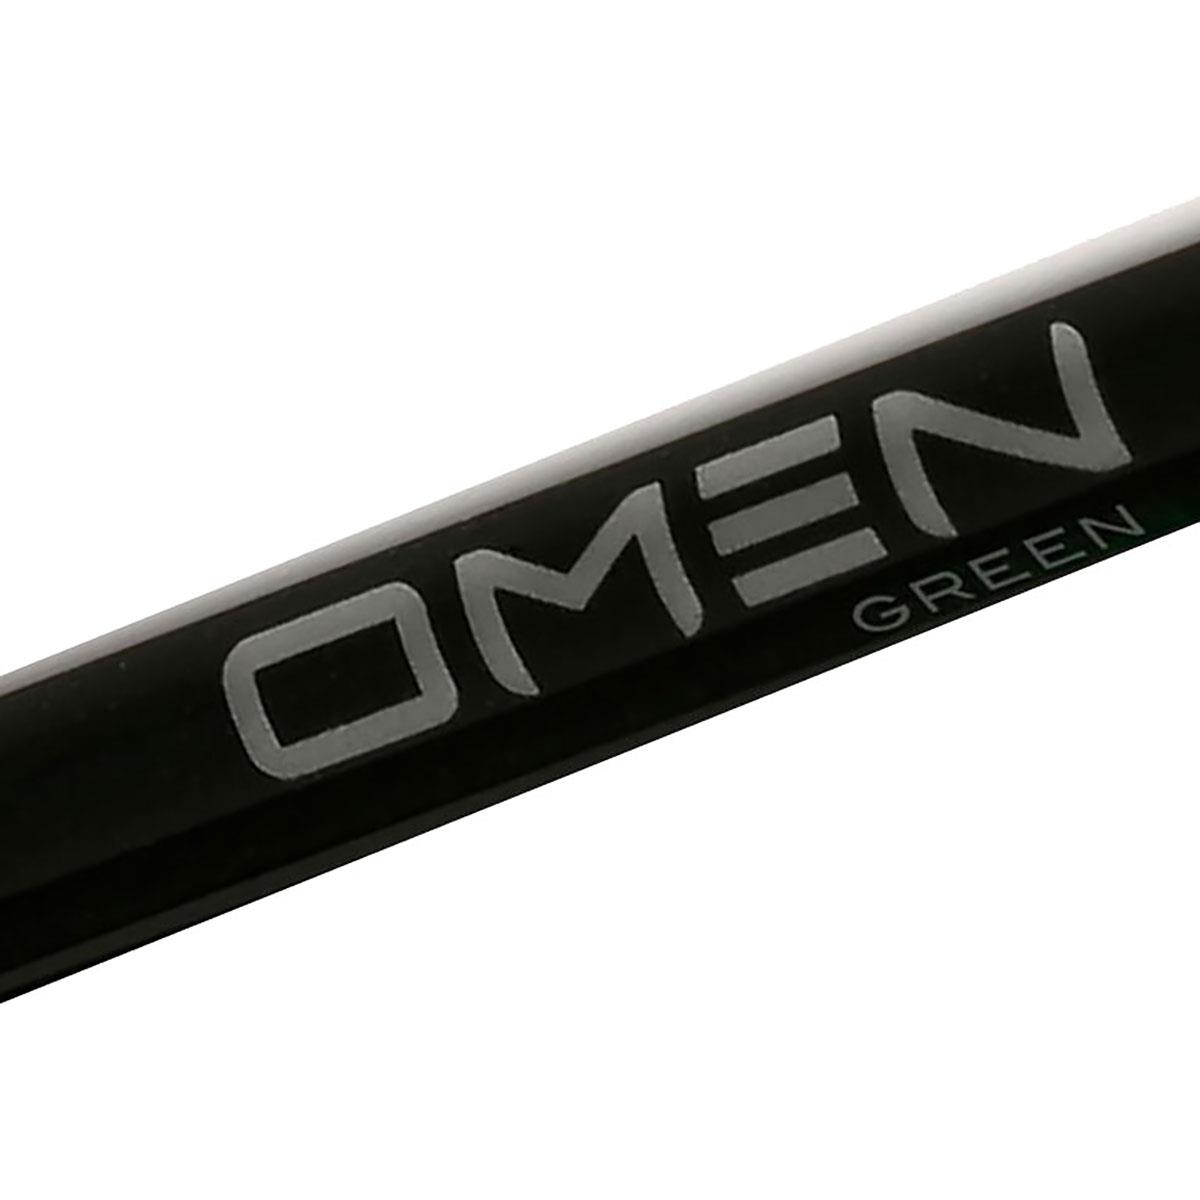 Unique 13 Fishing Omen Green 2 Spinning Rod Online Store Sale at